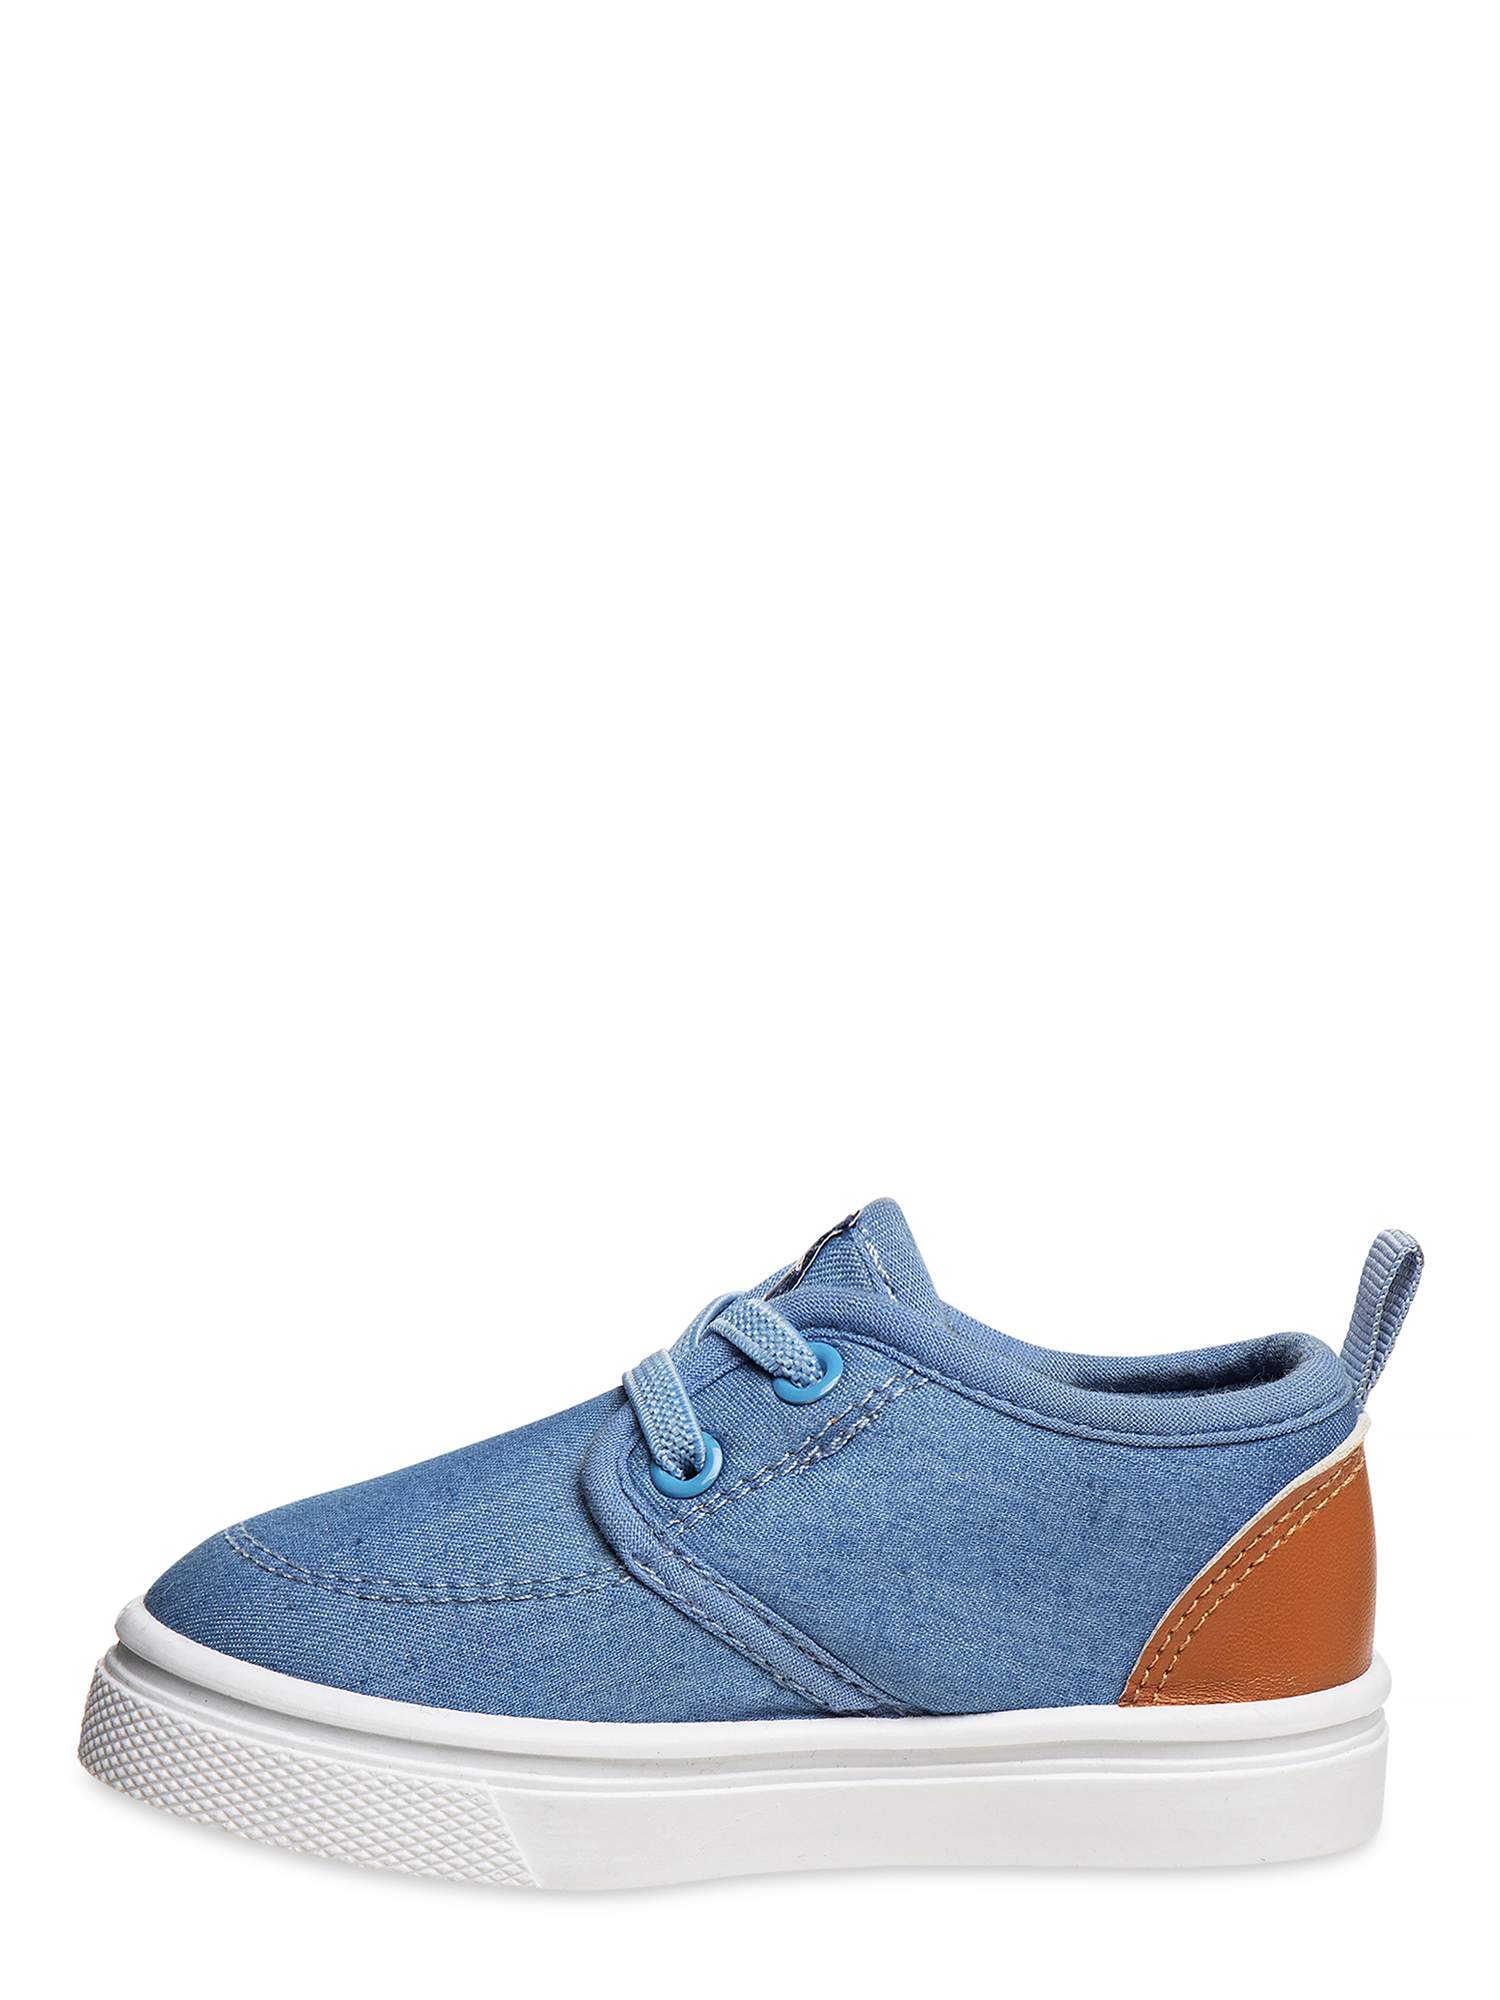 Beverly Hills Polo Club Toddler Boys Denim Colorblock Casual Sneakers - image 2 of 5